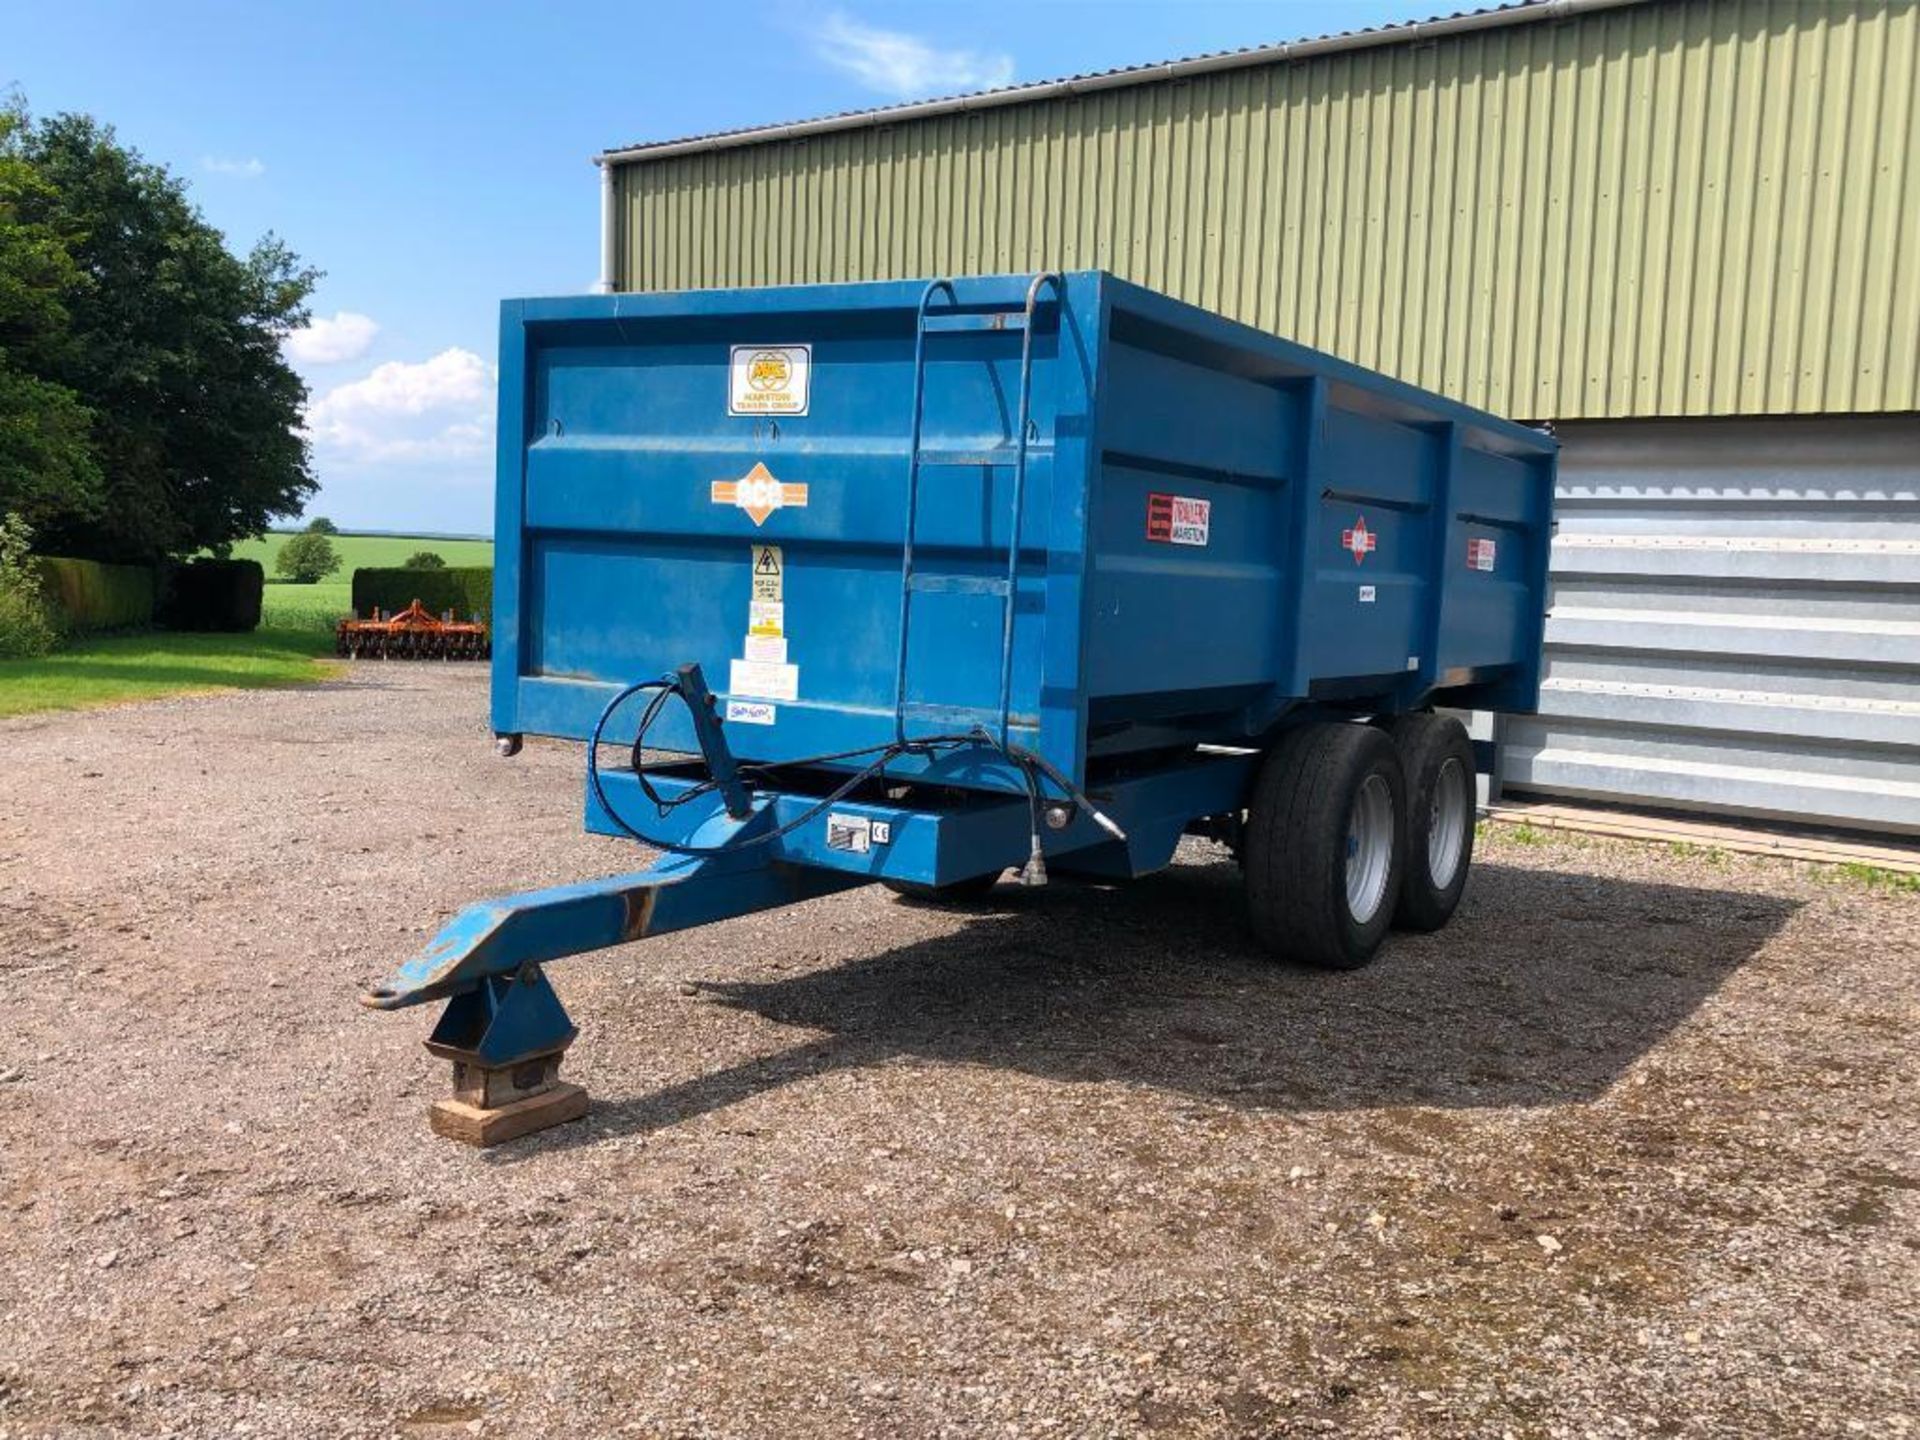 1997 AS Marston ACE 10t grain trailer c/w manual tailgate, grain chute, sprung axle on 385/55R22.5 w - Image 16 of 28